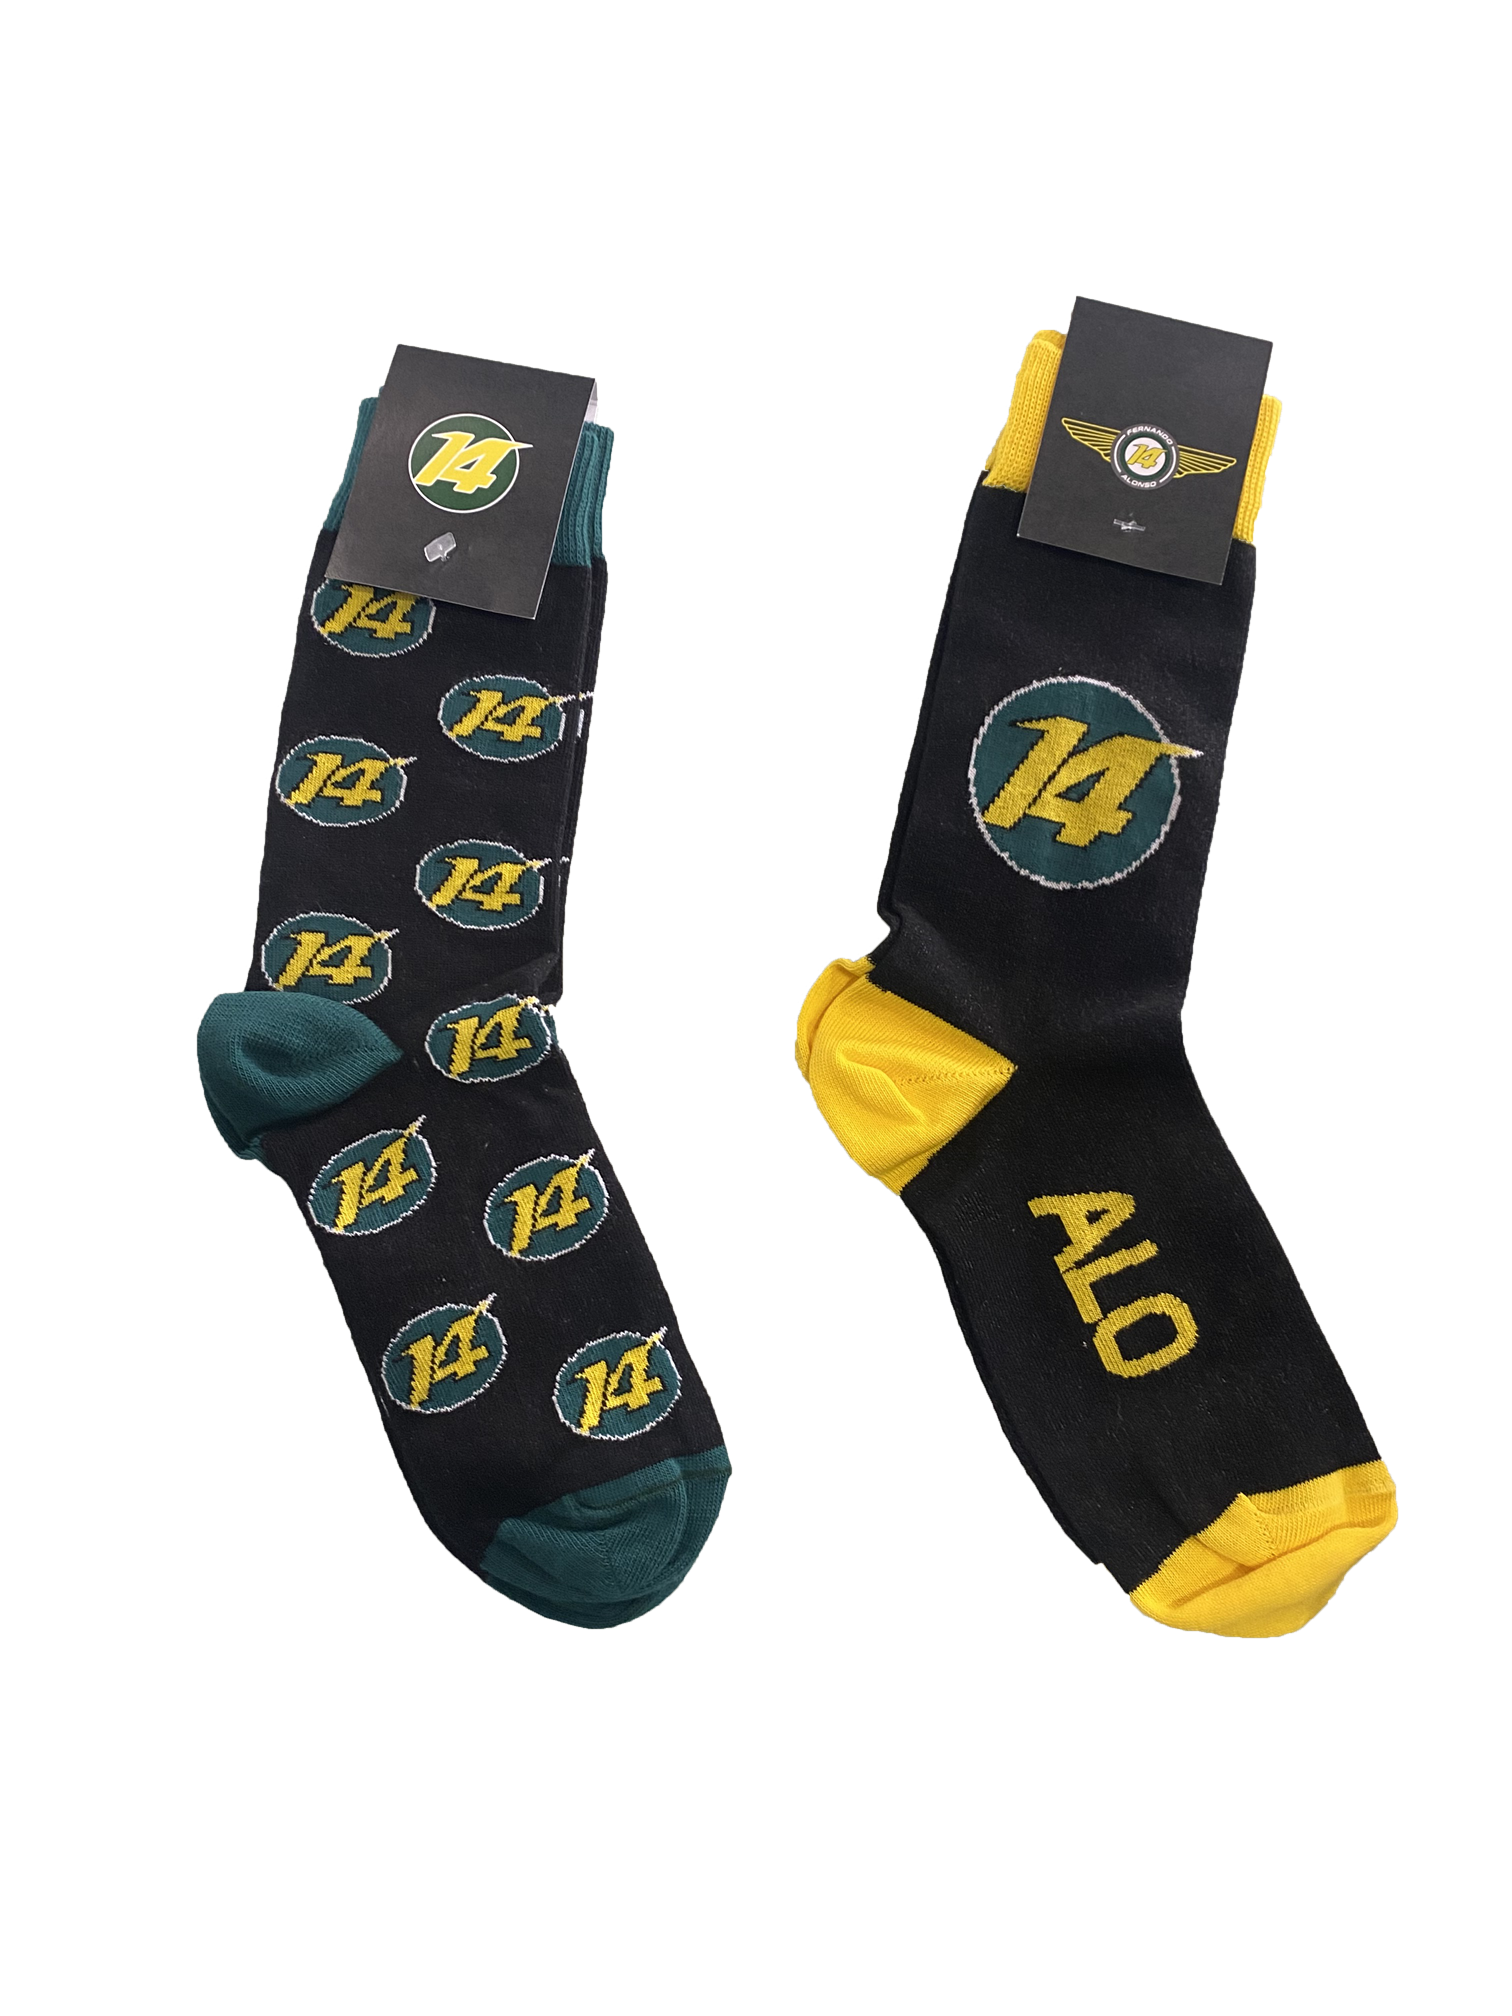 Personalized FA socks with the number 14 - Museo y Circuito